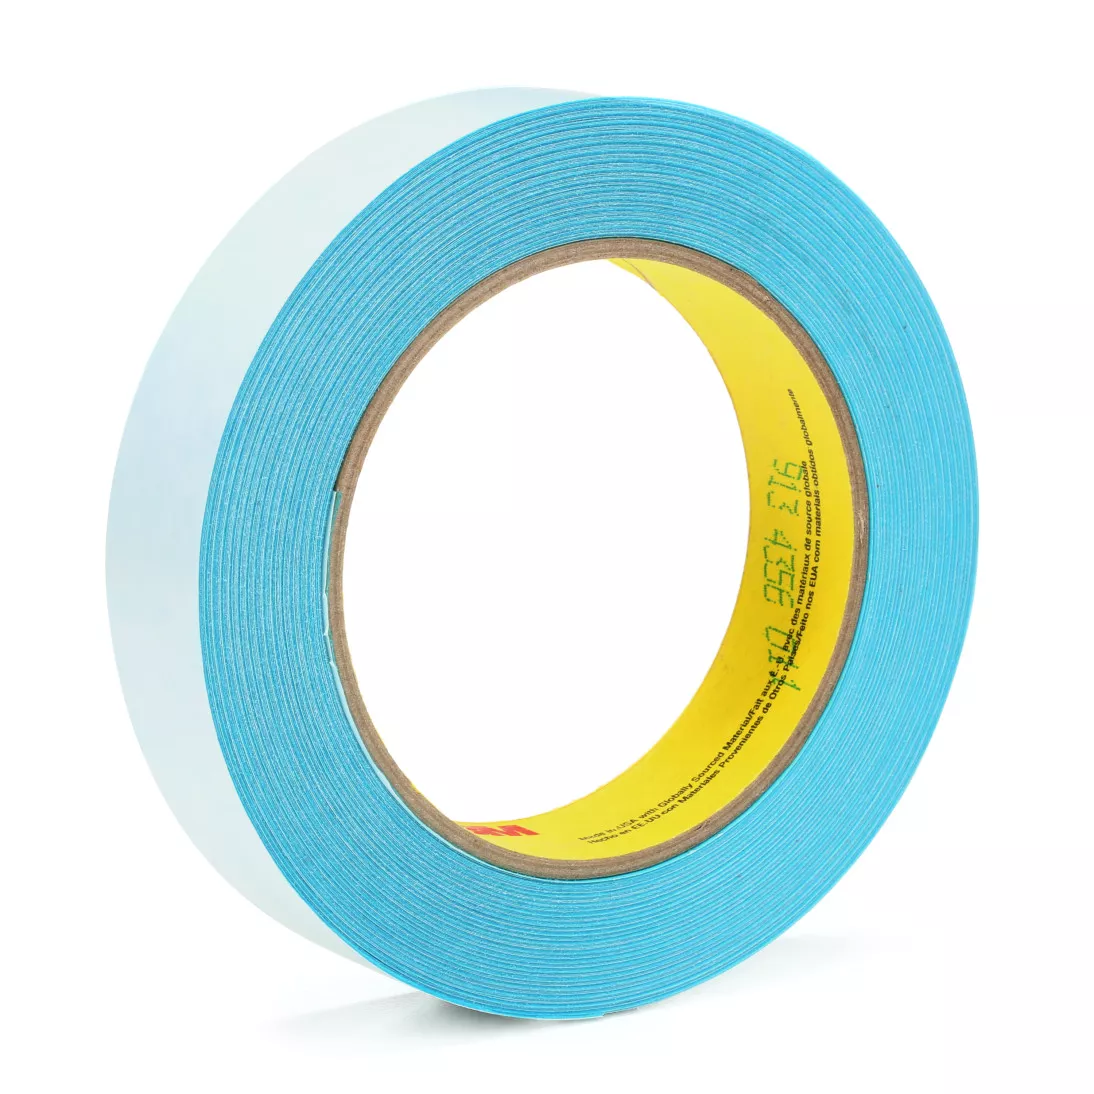 3M™ Repulpable Double Coated Flying Splice Tape 913, Blue, 12 mm x 33 m,
3 mil, 72 rolls per case